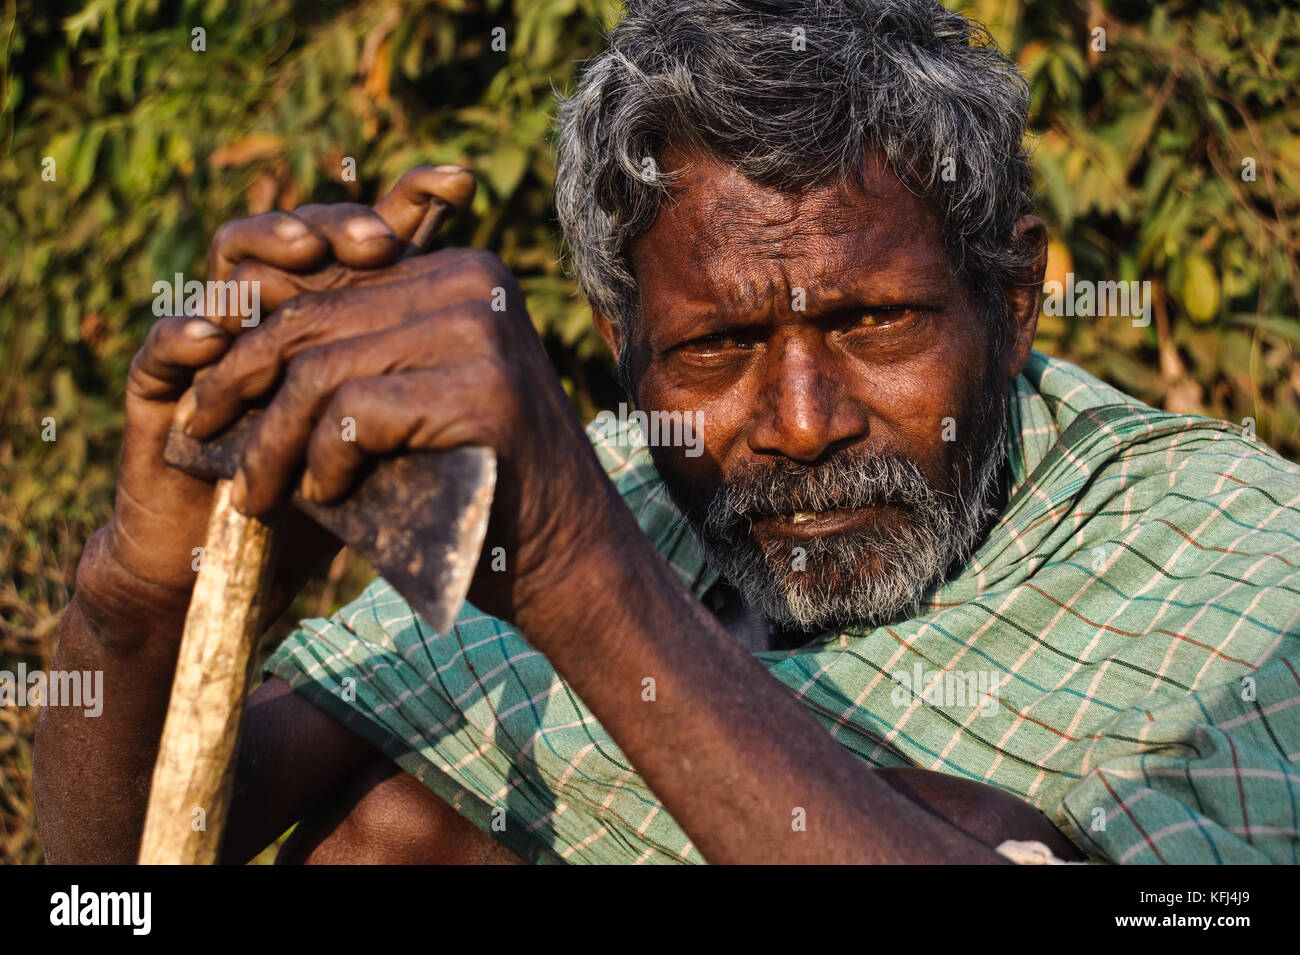 Hindu man from a low caste on his way to the forest to cut firewood ( Niyamgiri hills, India) Stock Photo